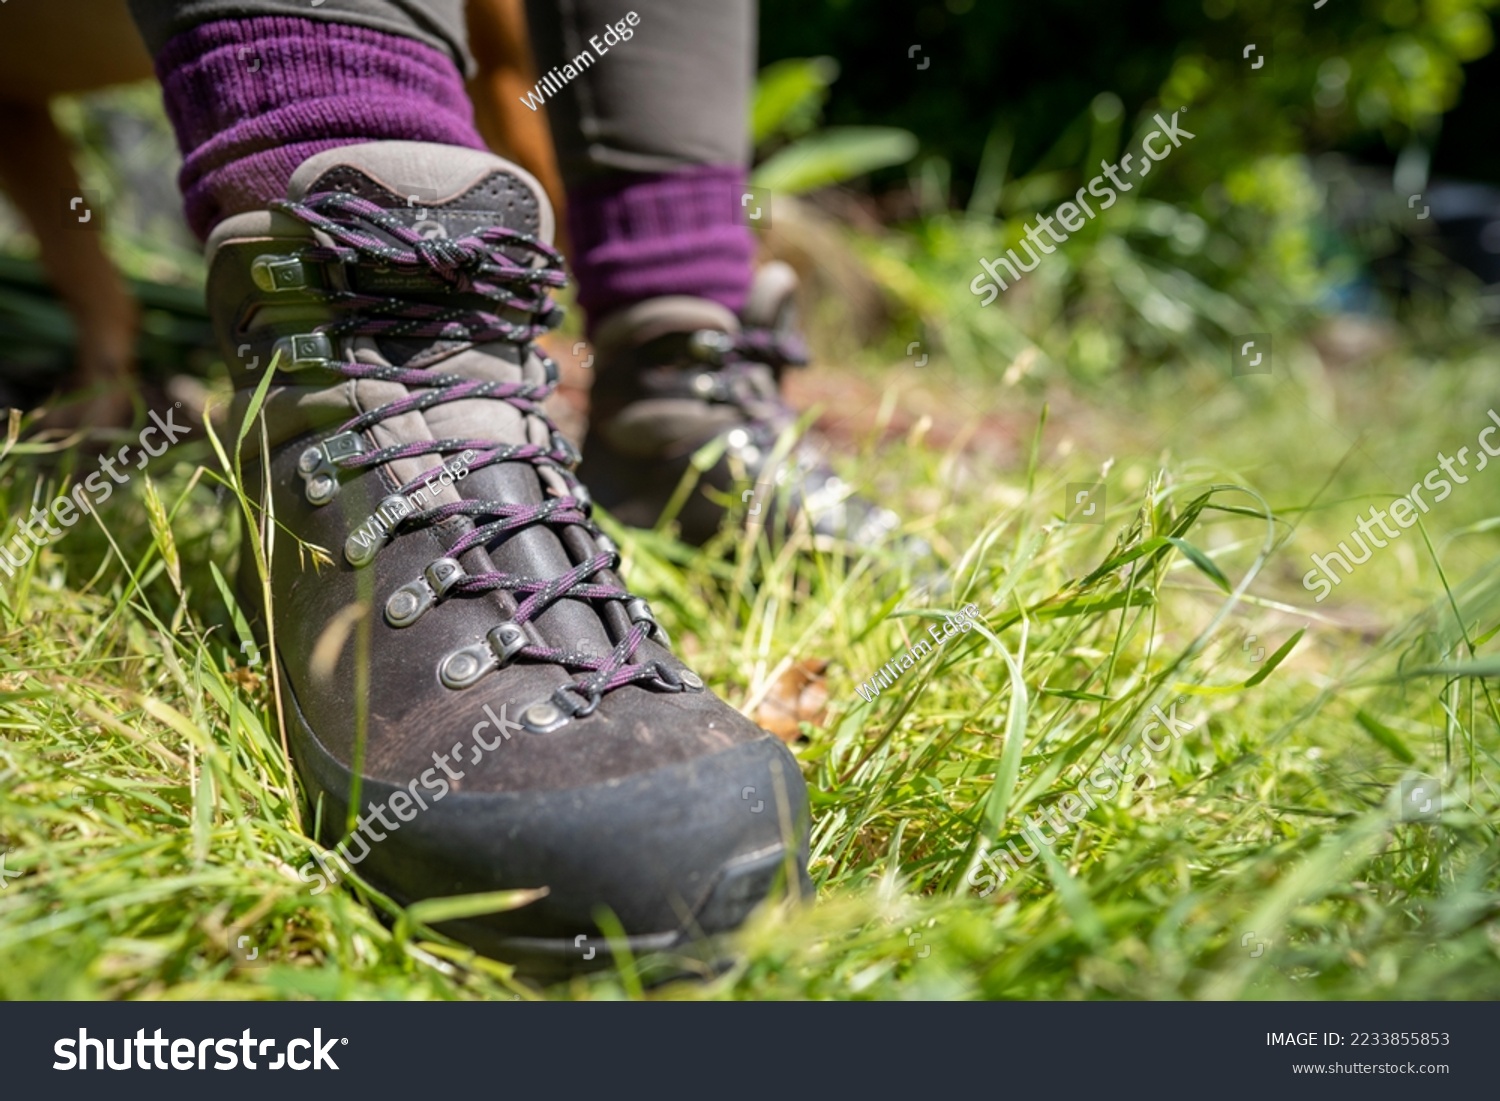 Tying shoelaces on hiking boots by a girl on a hike in spring #2233855853